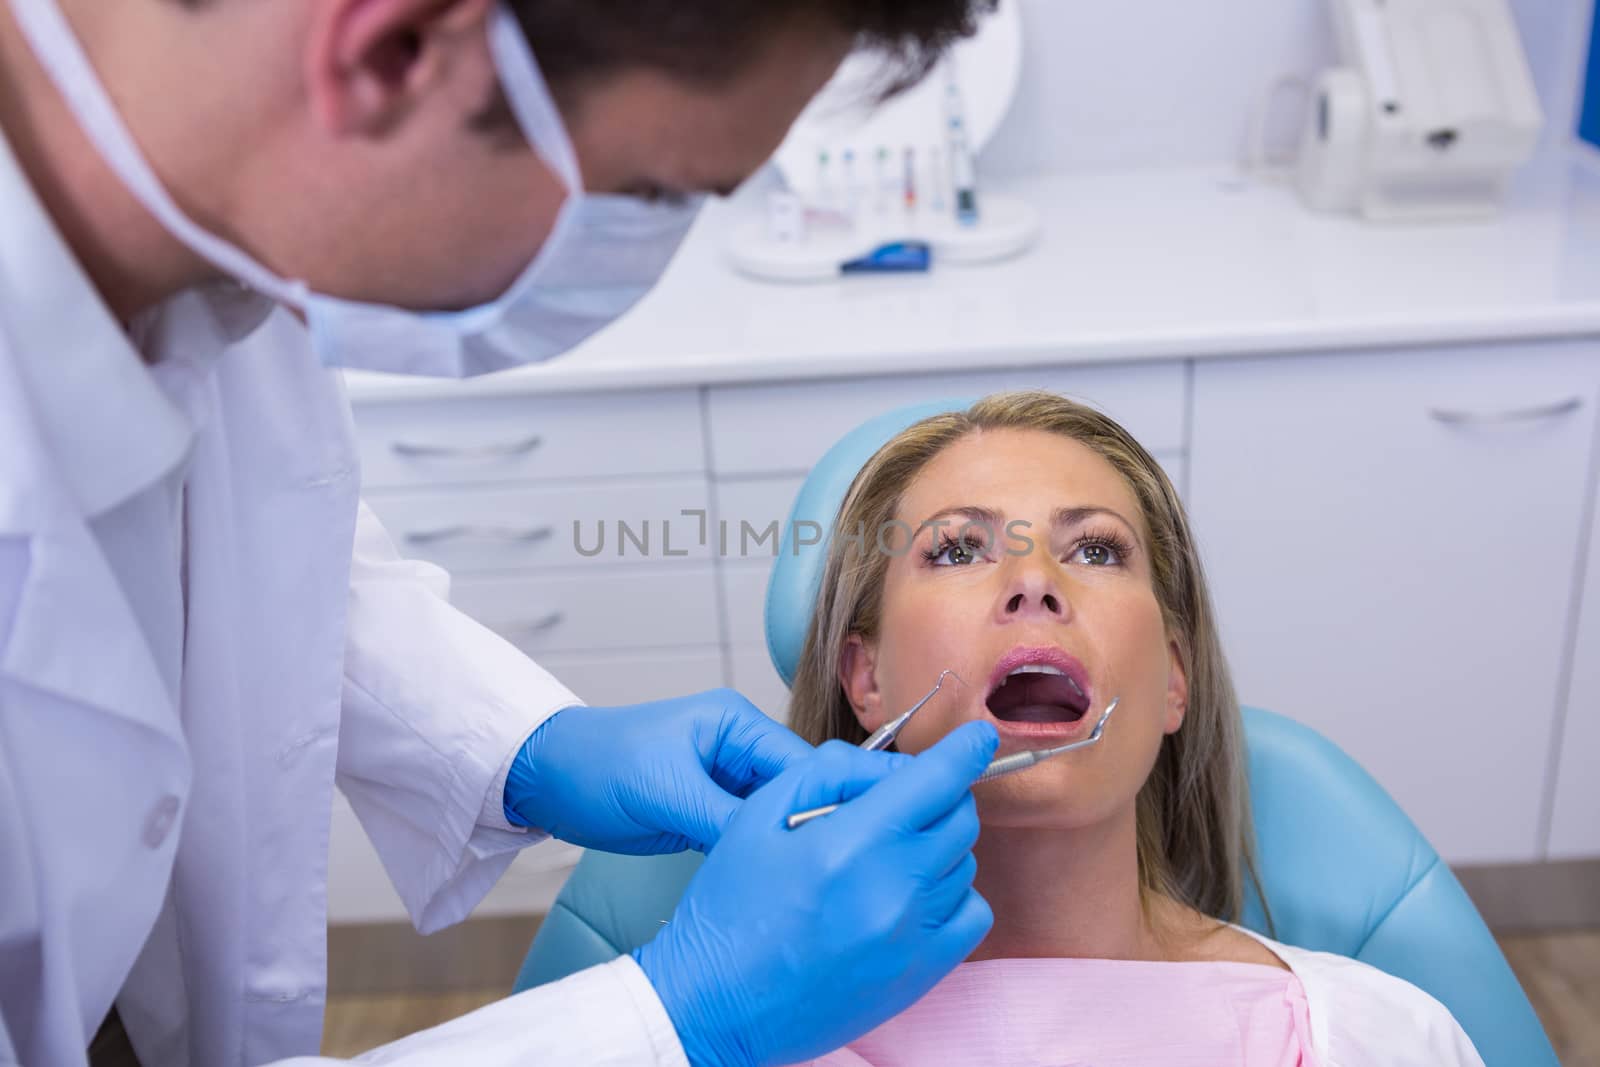 Dentist holding tools while examining woman at medical clinic by Wavebreakmedia